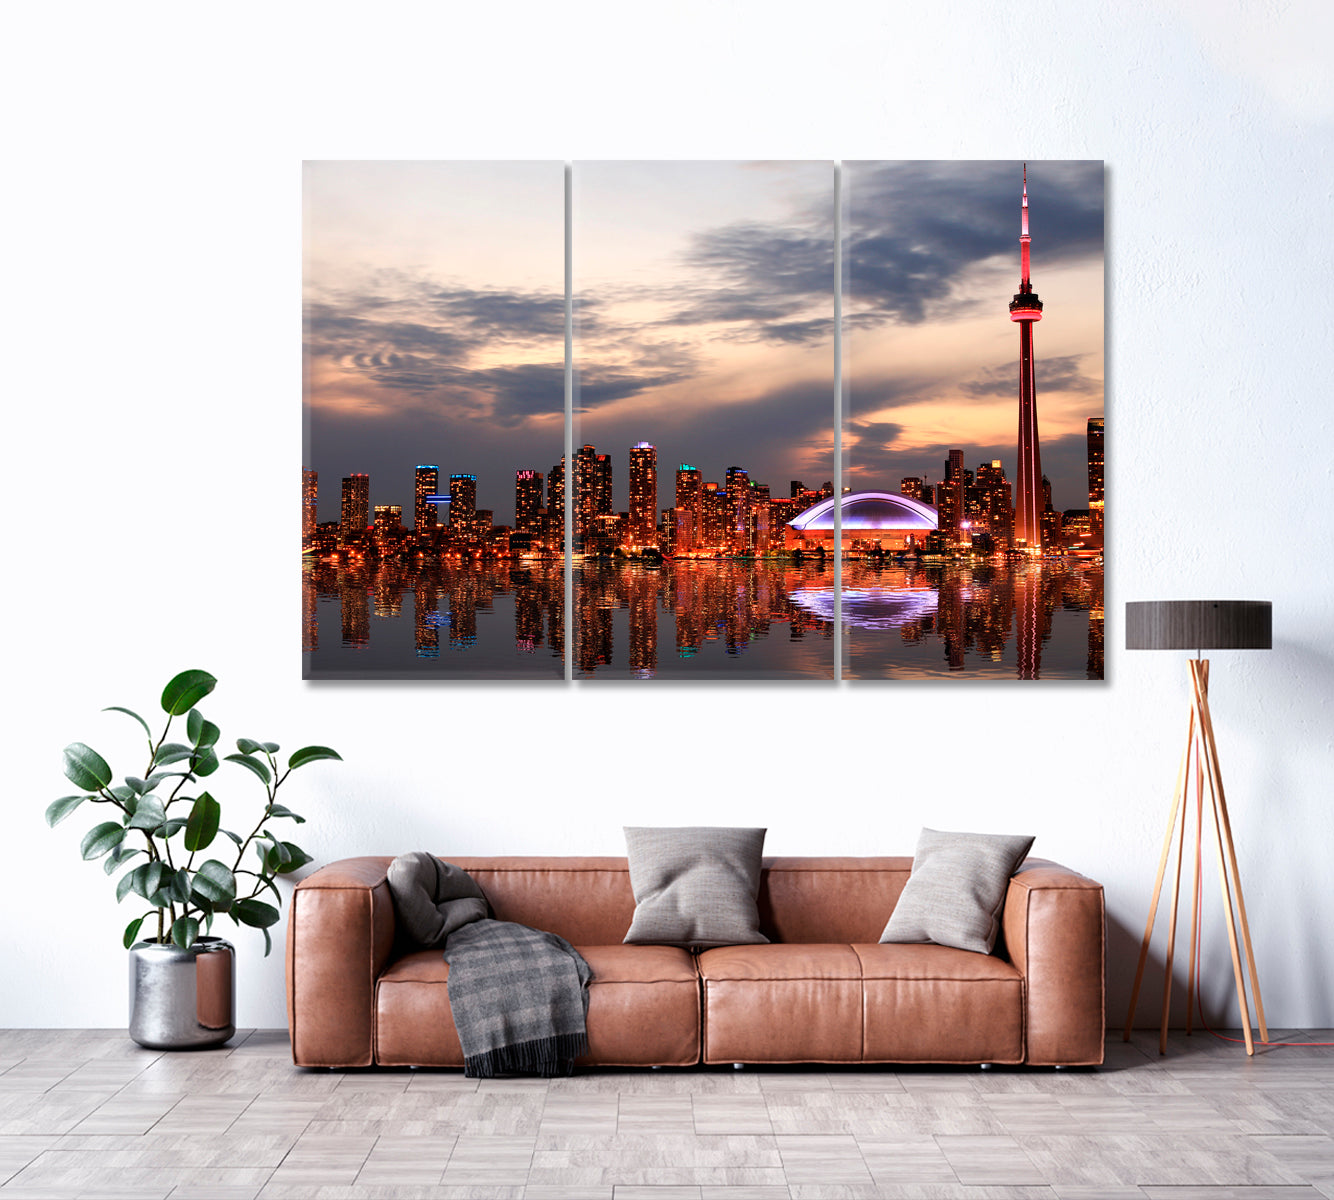 Downtown Toronto Canada at Night Canvas Print ArtLexy 3 Panels 36"x24" inches 